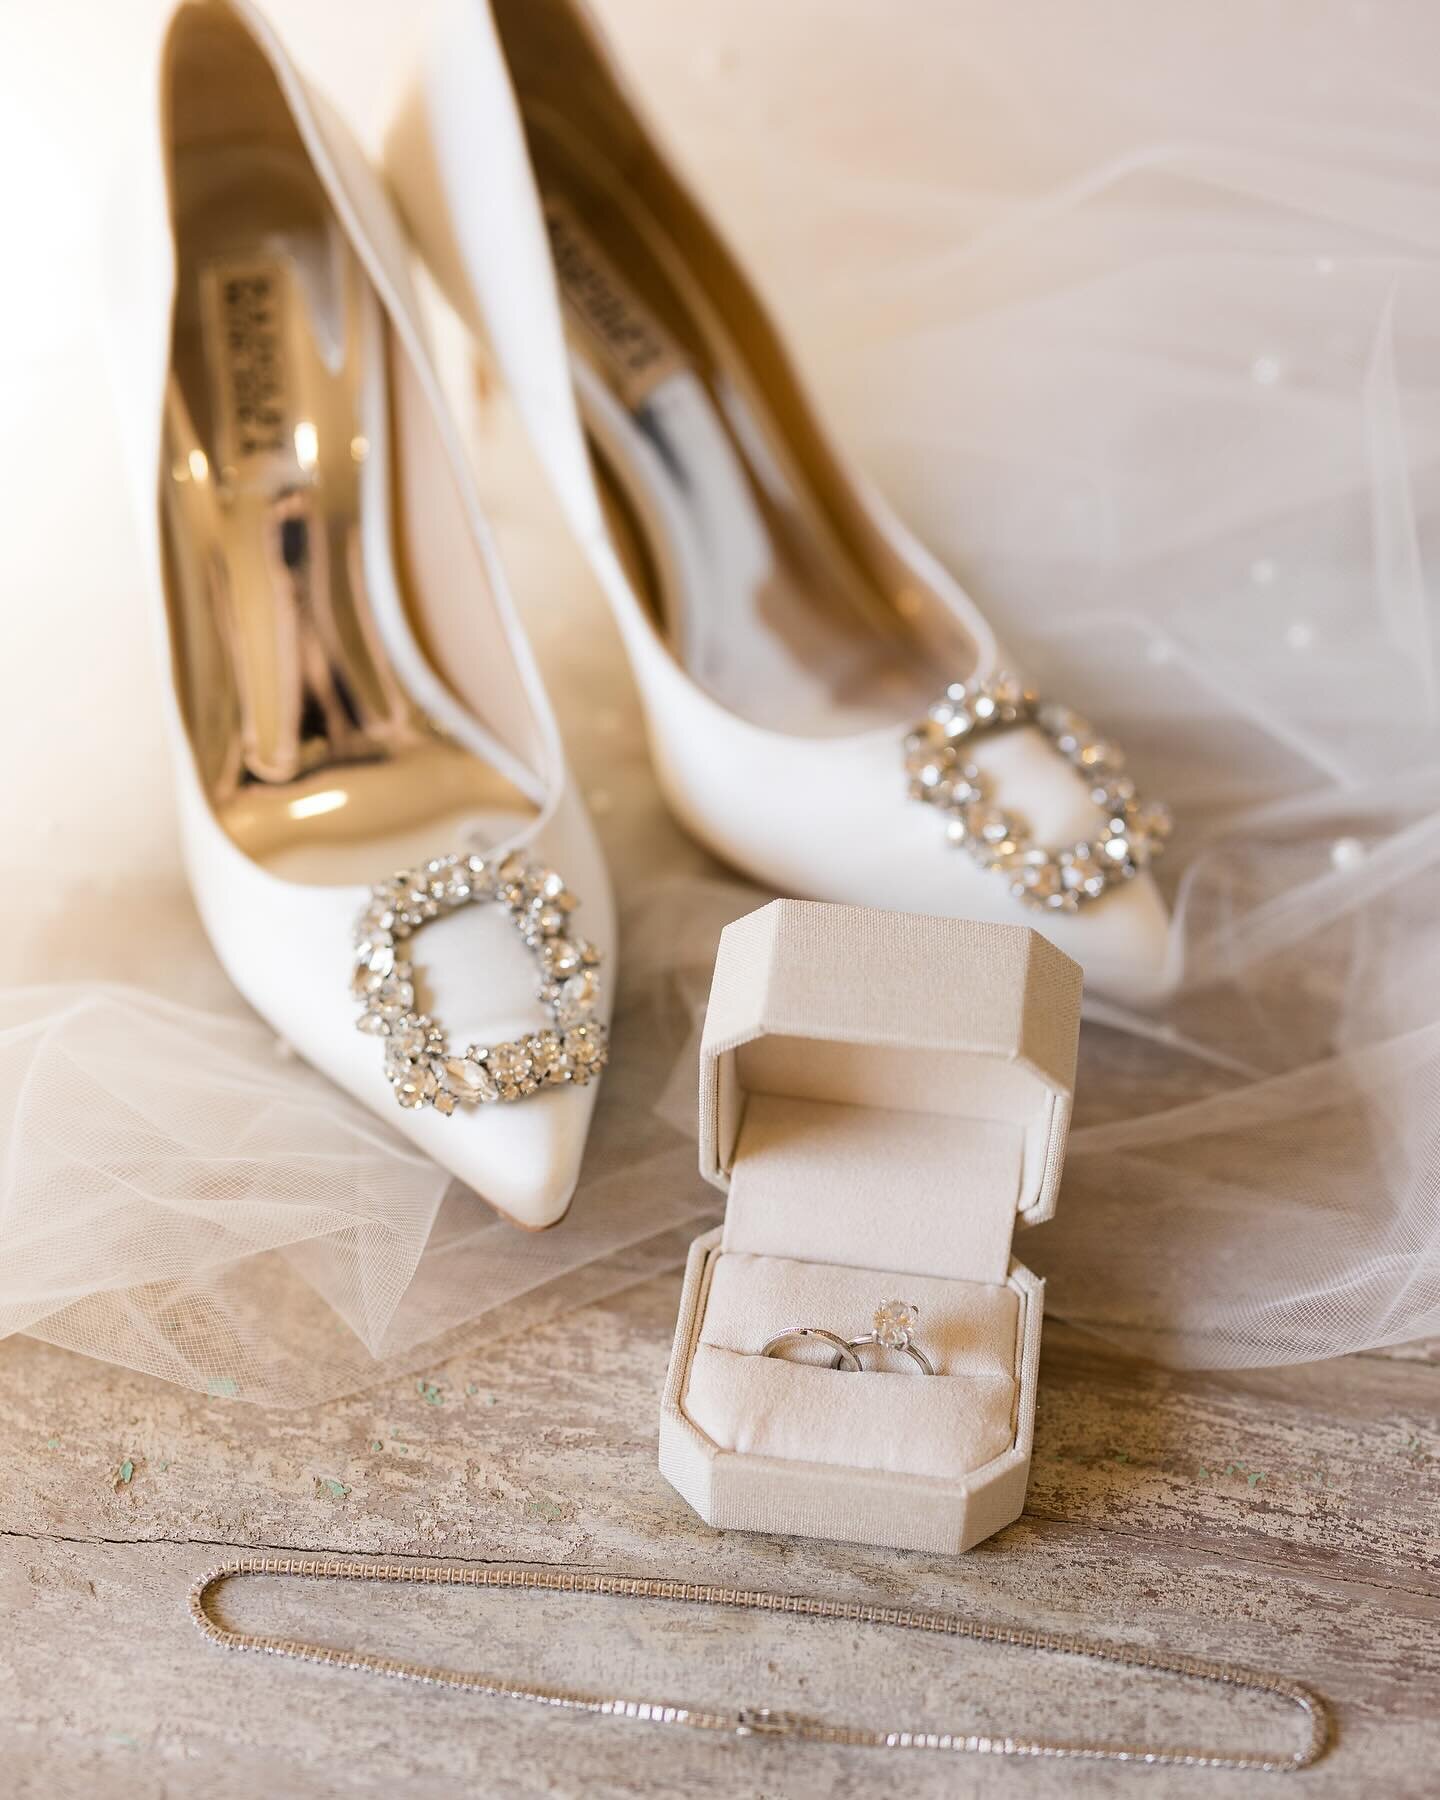 Stepping into forever 💍🕊️

Venue- @andalusiacountryclub 
Event planner - @invisionevents 
Photo- @lovelily.photo 
Video - @hellobluefilms
Makeup- @kendallopez 
Floral/decor- @florango.shop 
Entertainment- @onthebeatmusicagency 
Papergoods- @stayspi